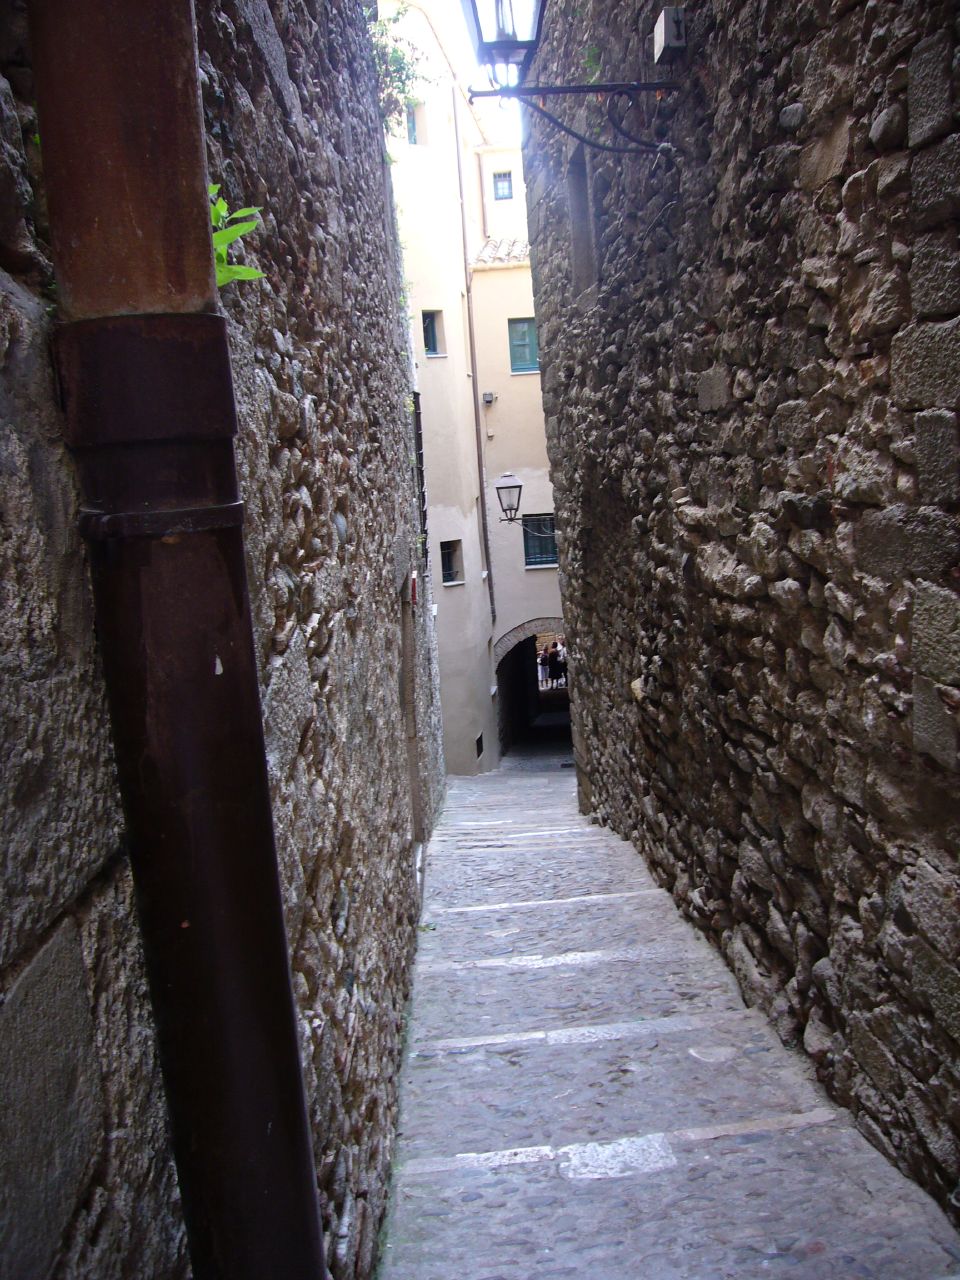 an alleyway with stairs going through it and some buildings in the background